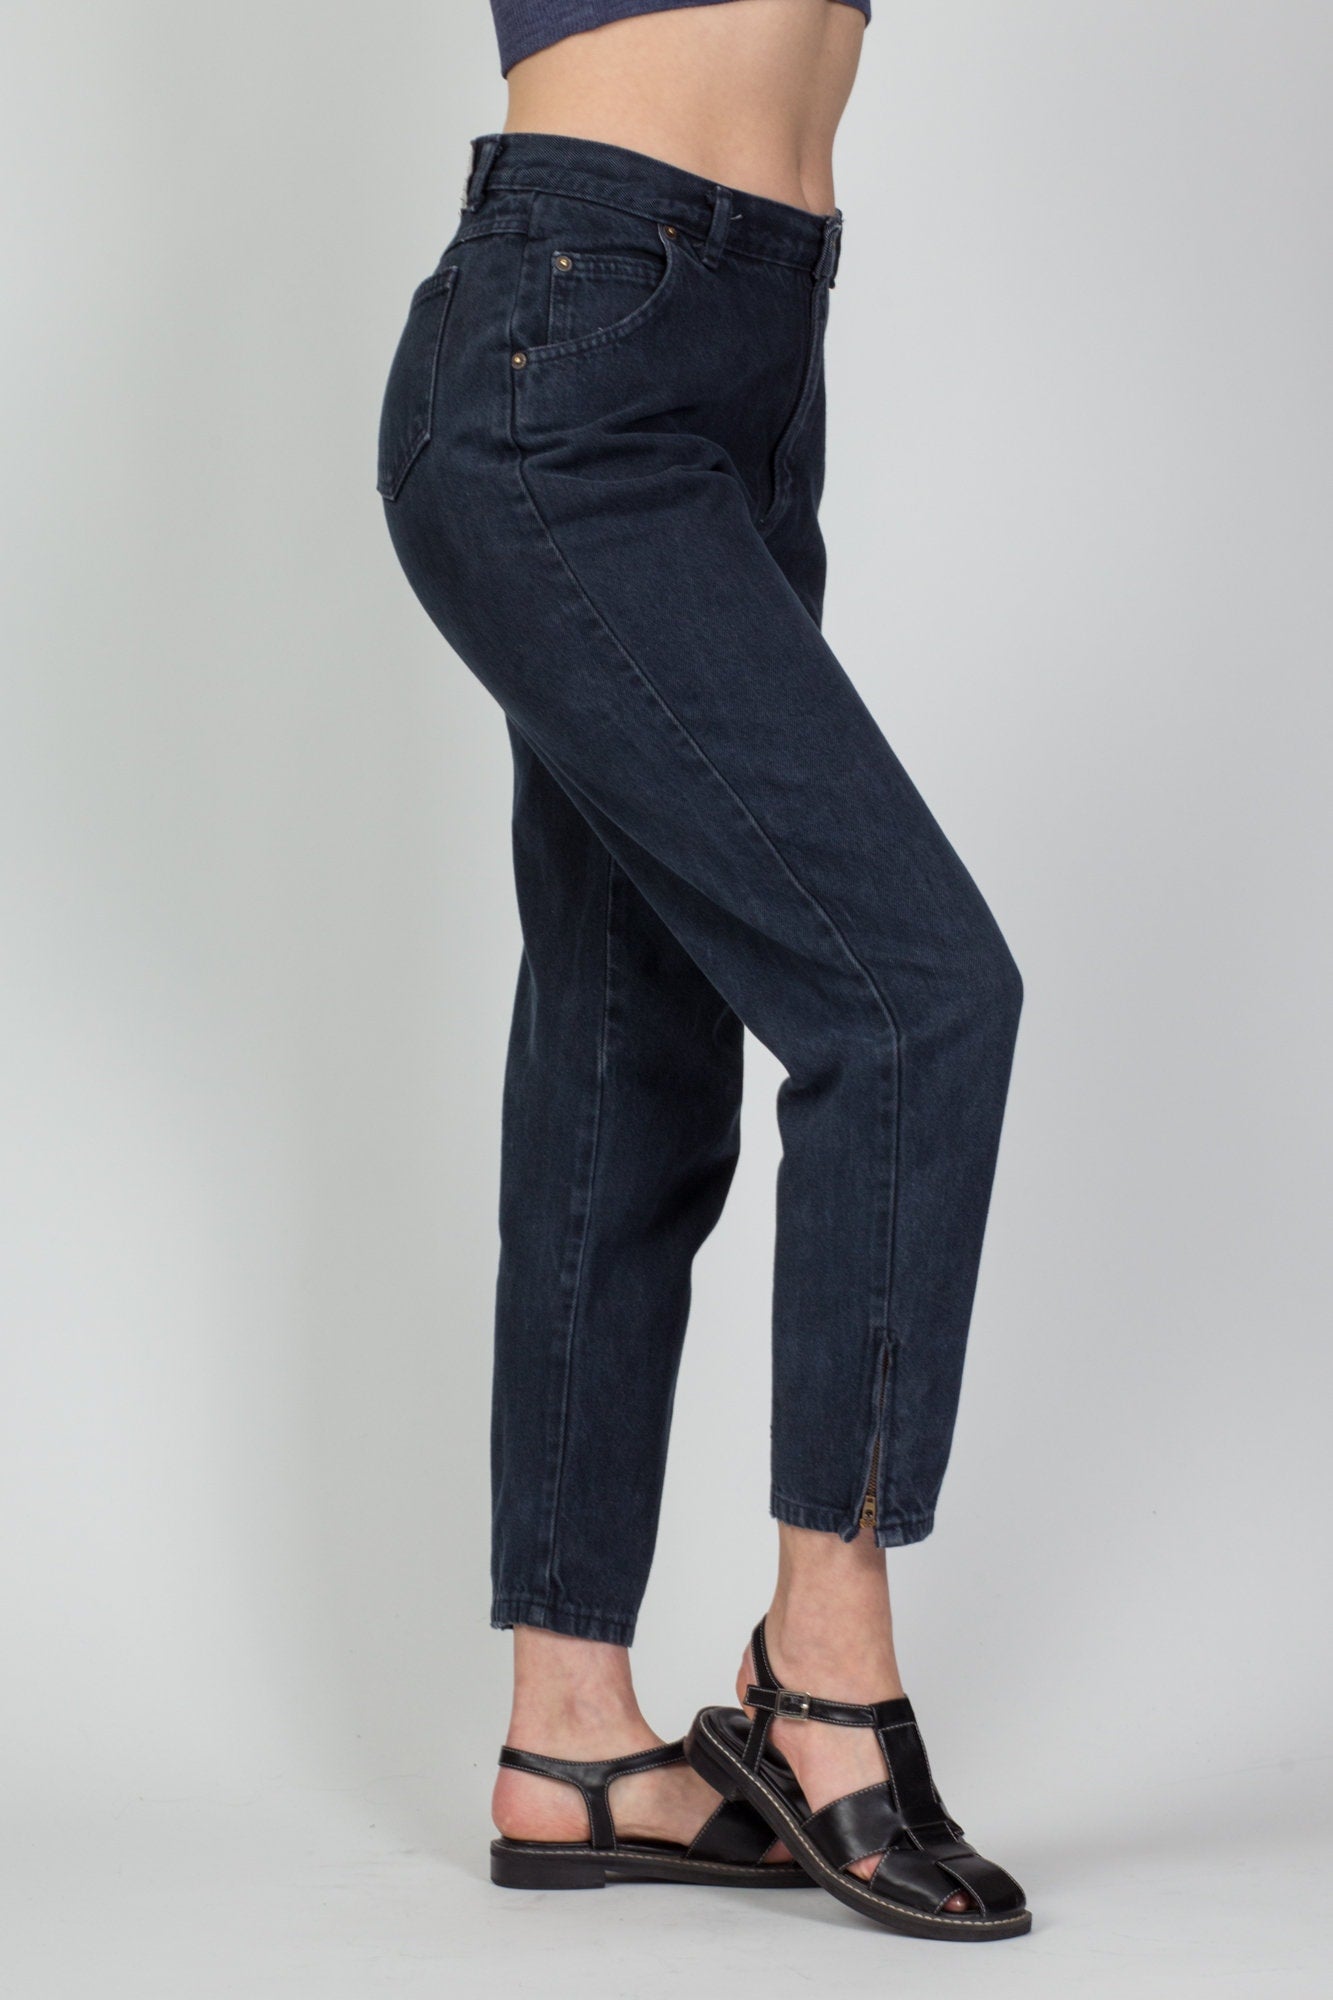 Old Navy Extra High-Waisted Jeans Review | POPSUGAR Fashion UK